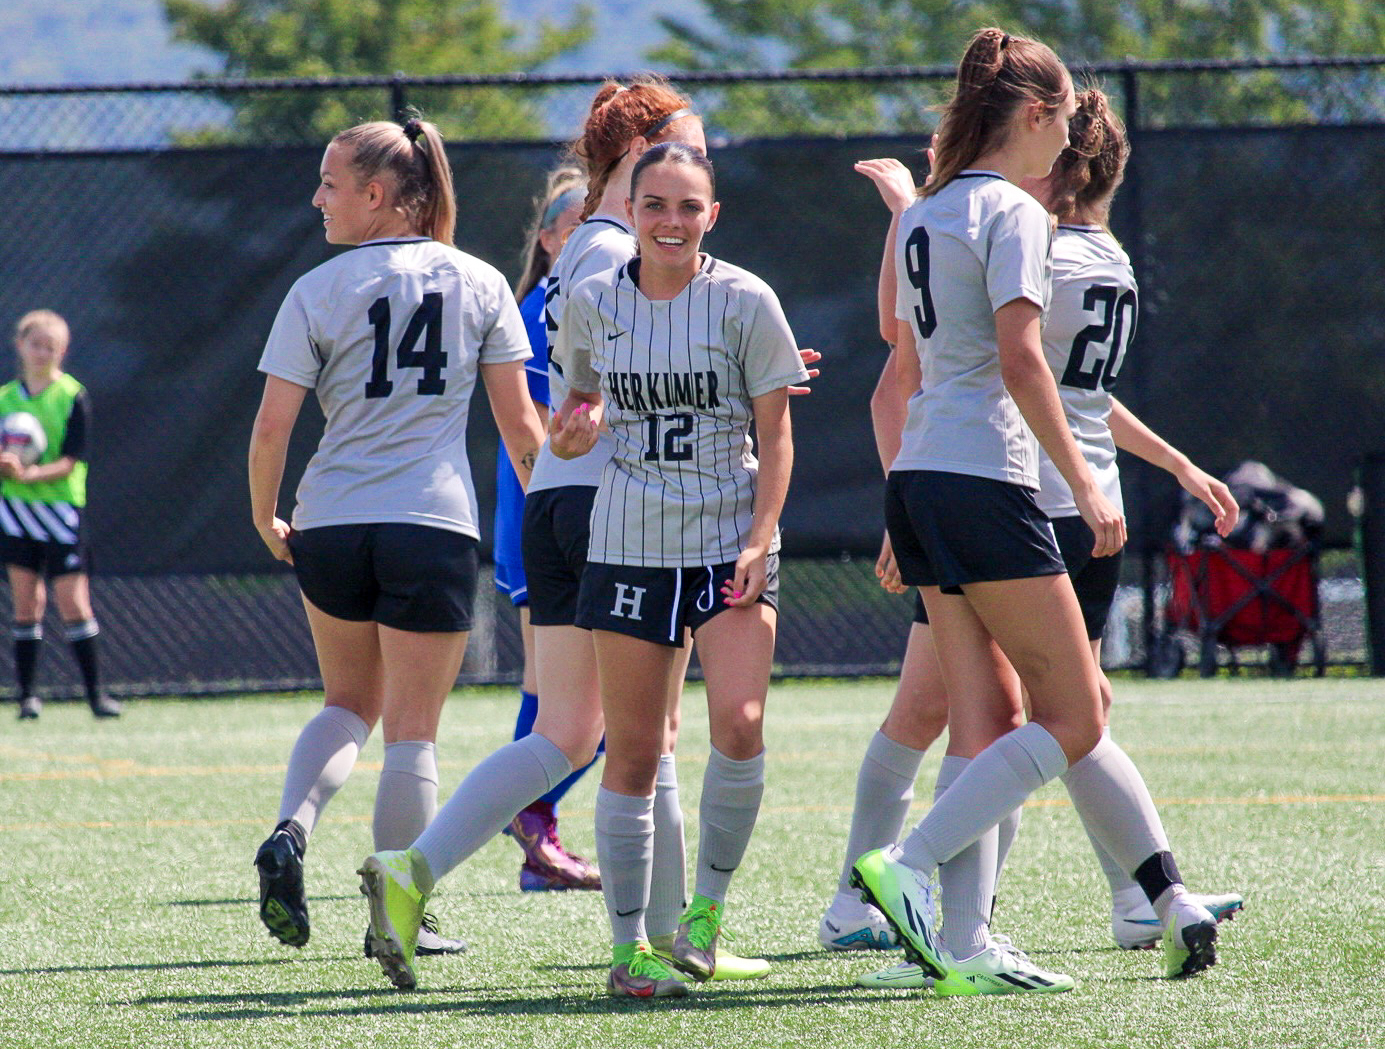 Women's Soccer Ranked No. 10 in Latest NJCAA Poll